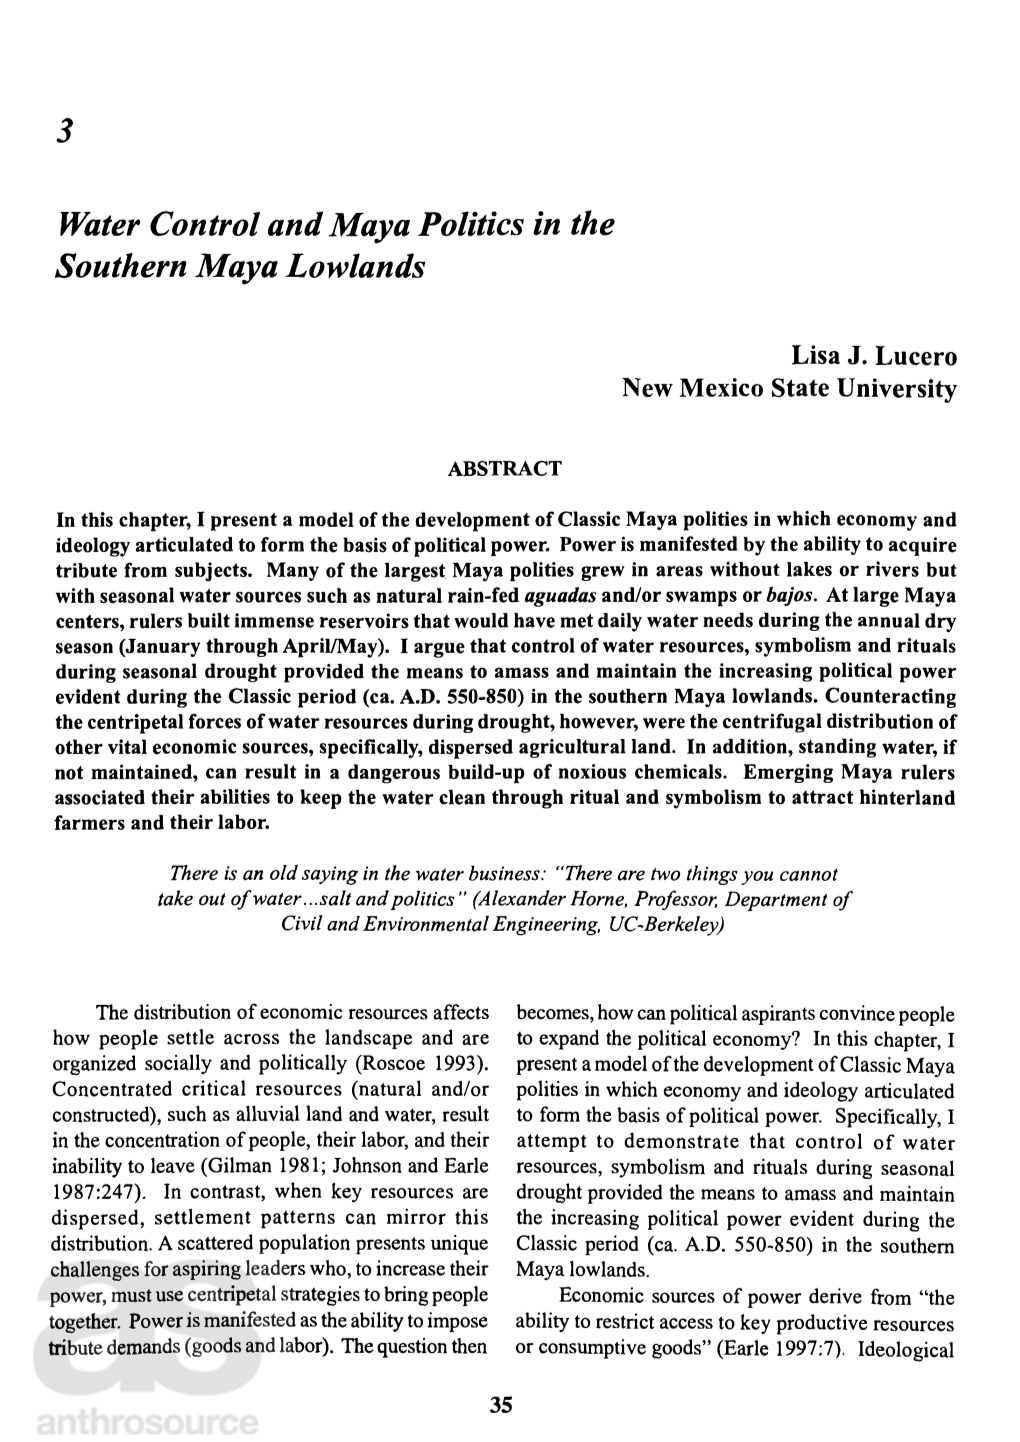 Water Control and Maya Politics in the Southern Maya Lowlands